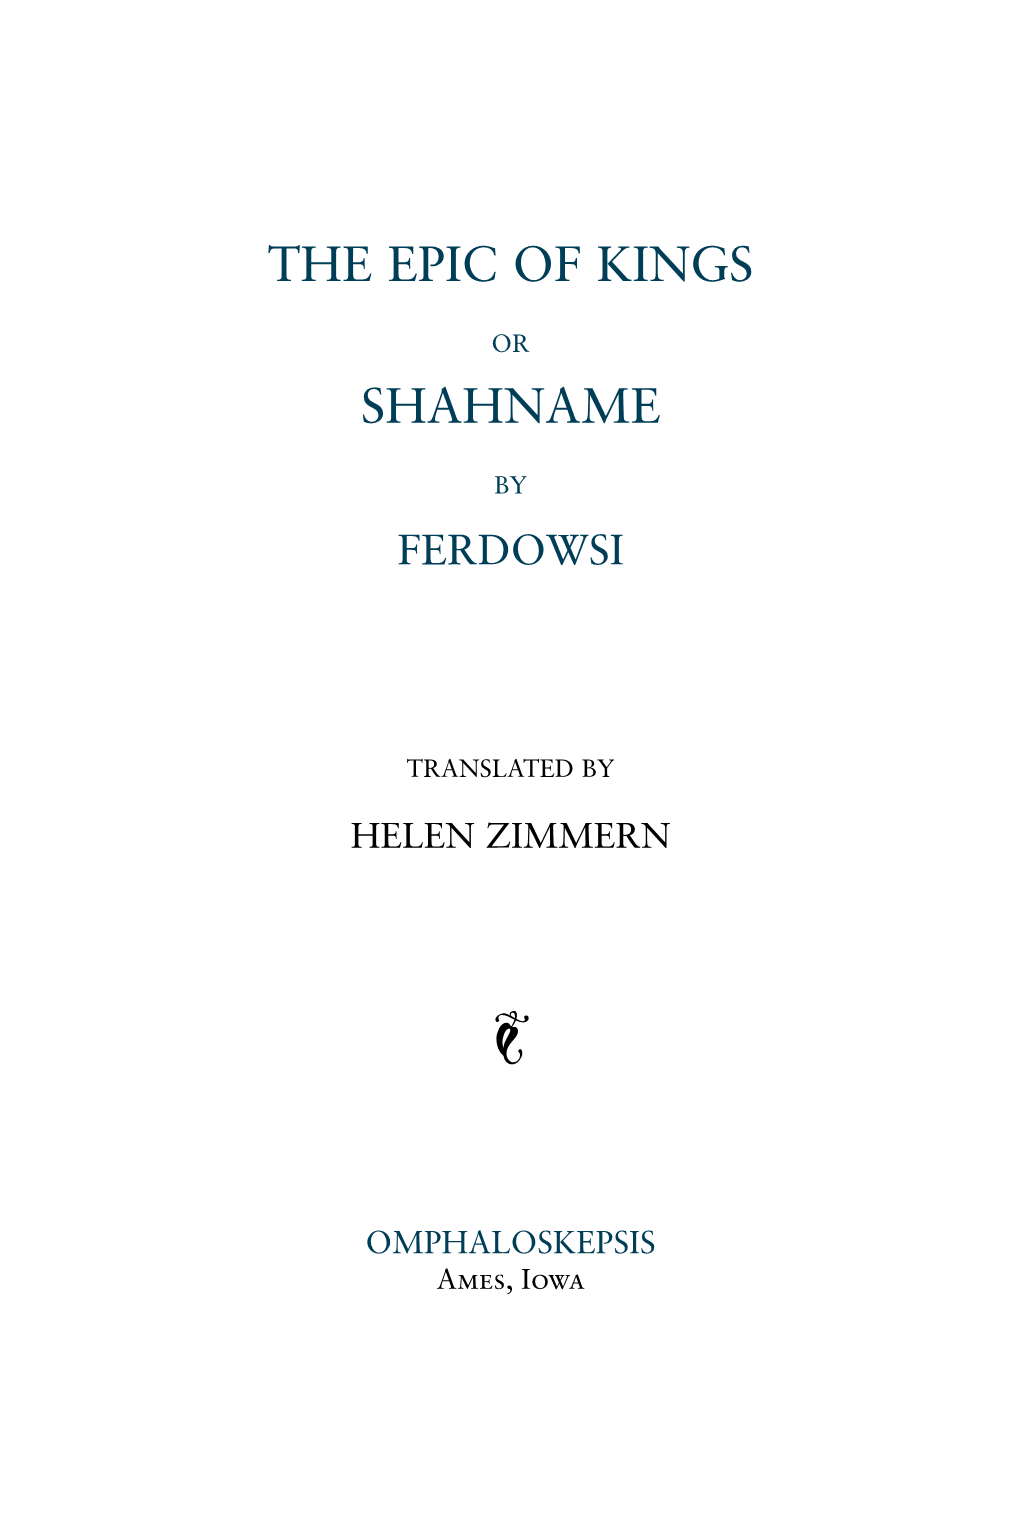 The Epic of Kings / Shahname